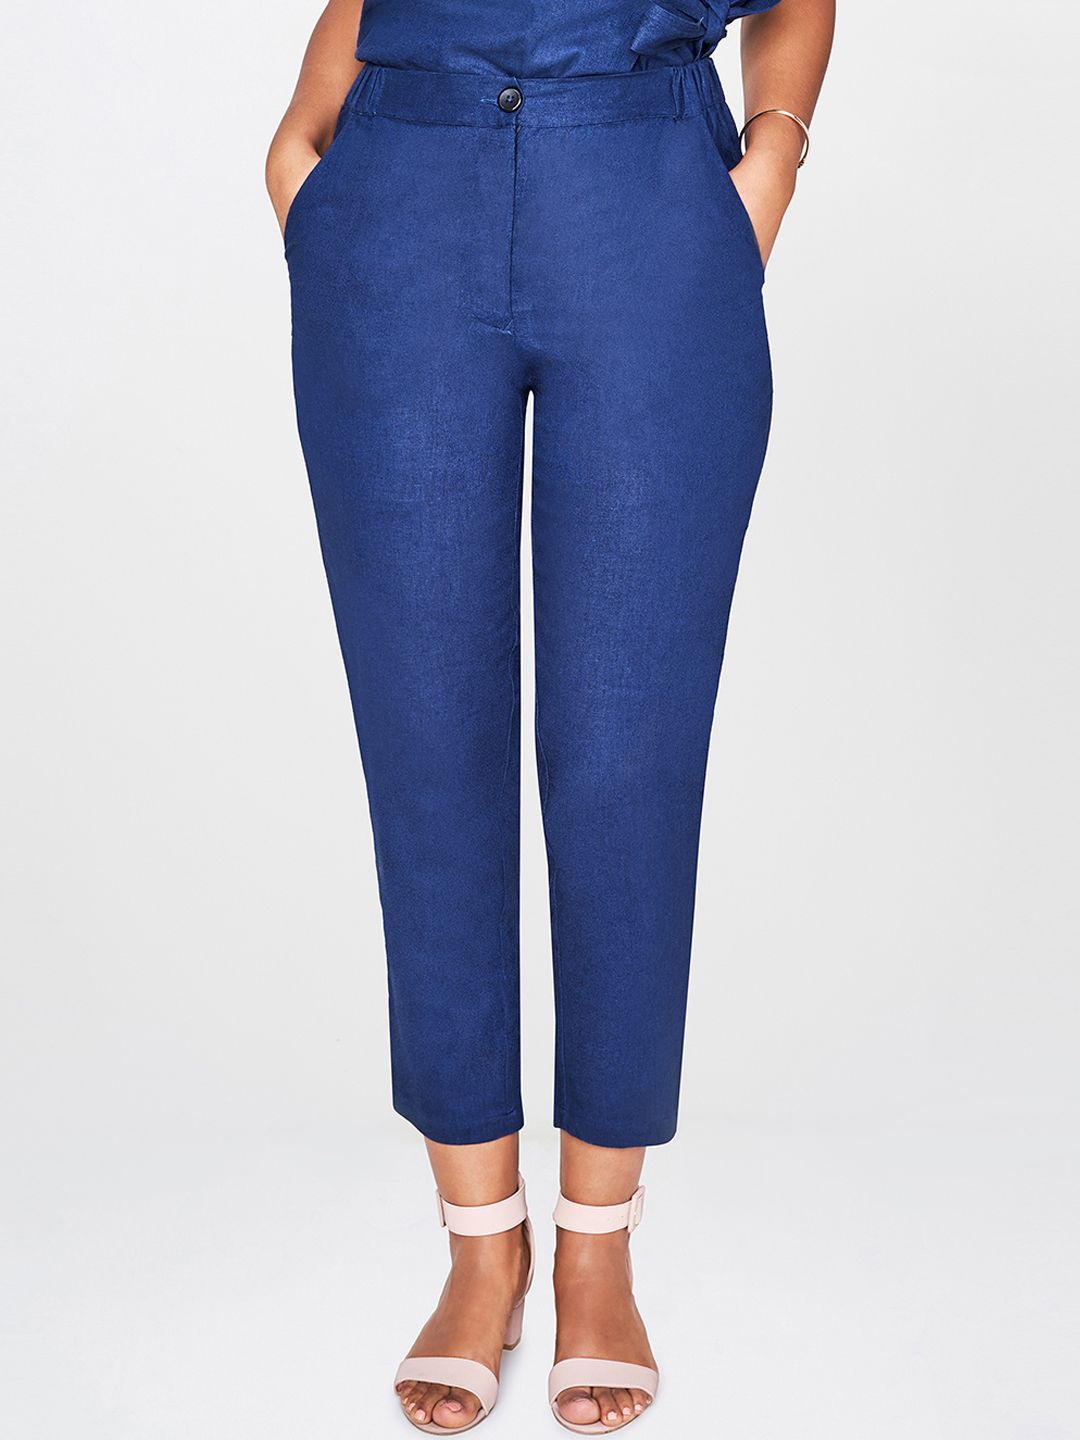 AND Women Blue Solid Peg Trousers Price in India